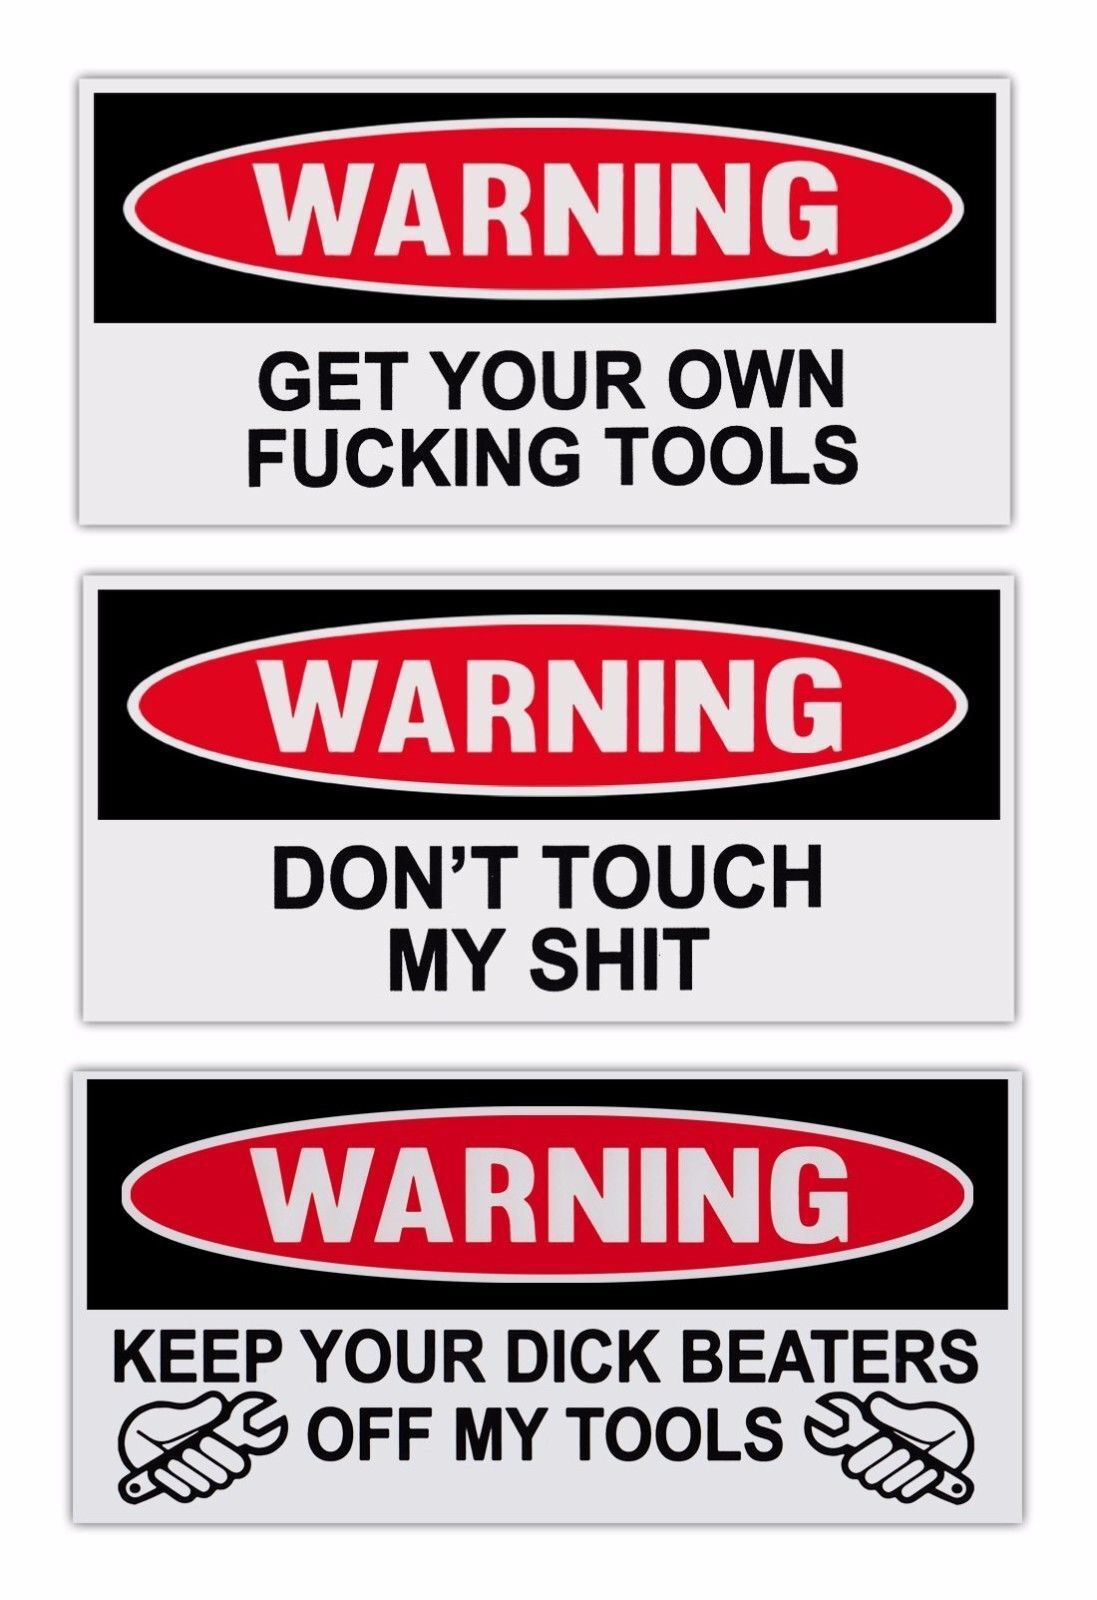 Funny Warning Stickers - Toolbox Combo Kit - 3 Stickers - Get Your Own Tools